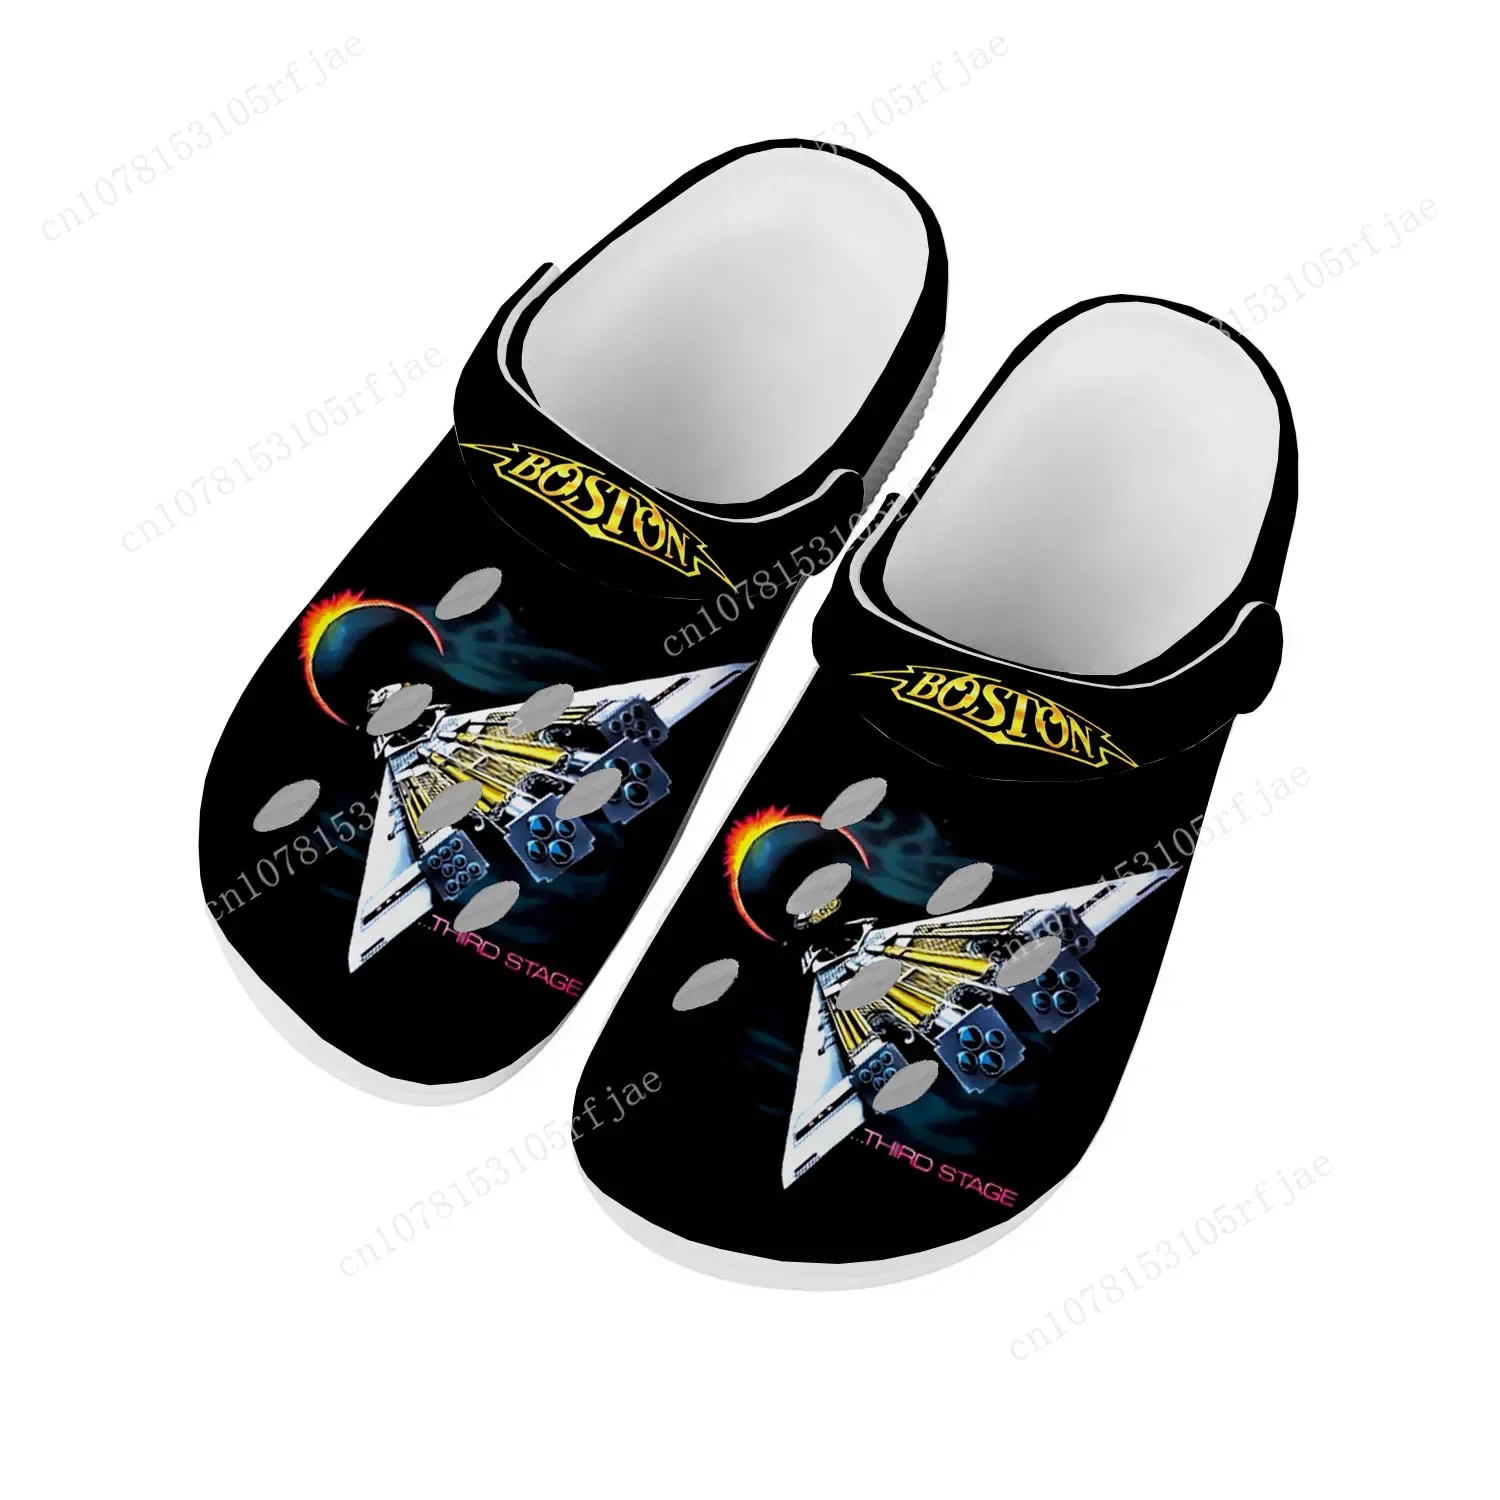 

Boston Band Rock Band Home Clogs Custom Water Shoes Mens Womens Teenager Shoe Garden Clog Breathable Beach Hole Slippers White